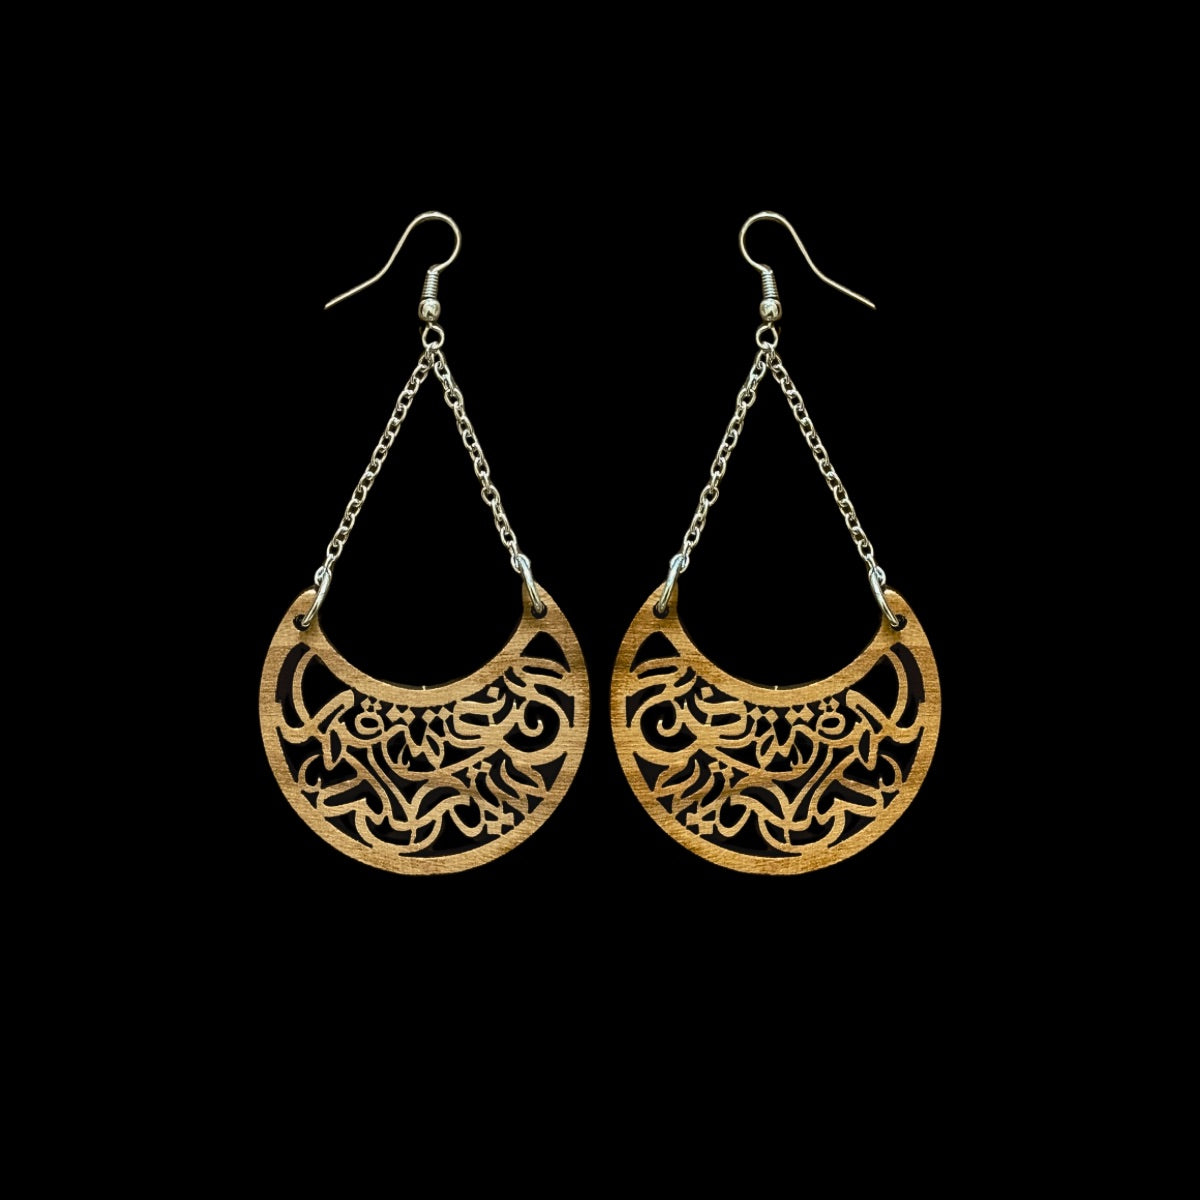 Olive Wood Arabic Calligraphy Earrings: "a moon will rise..."